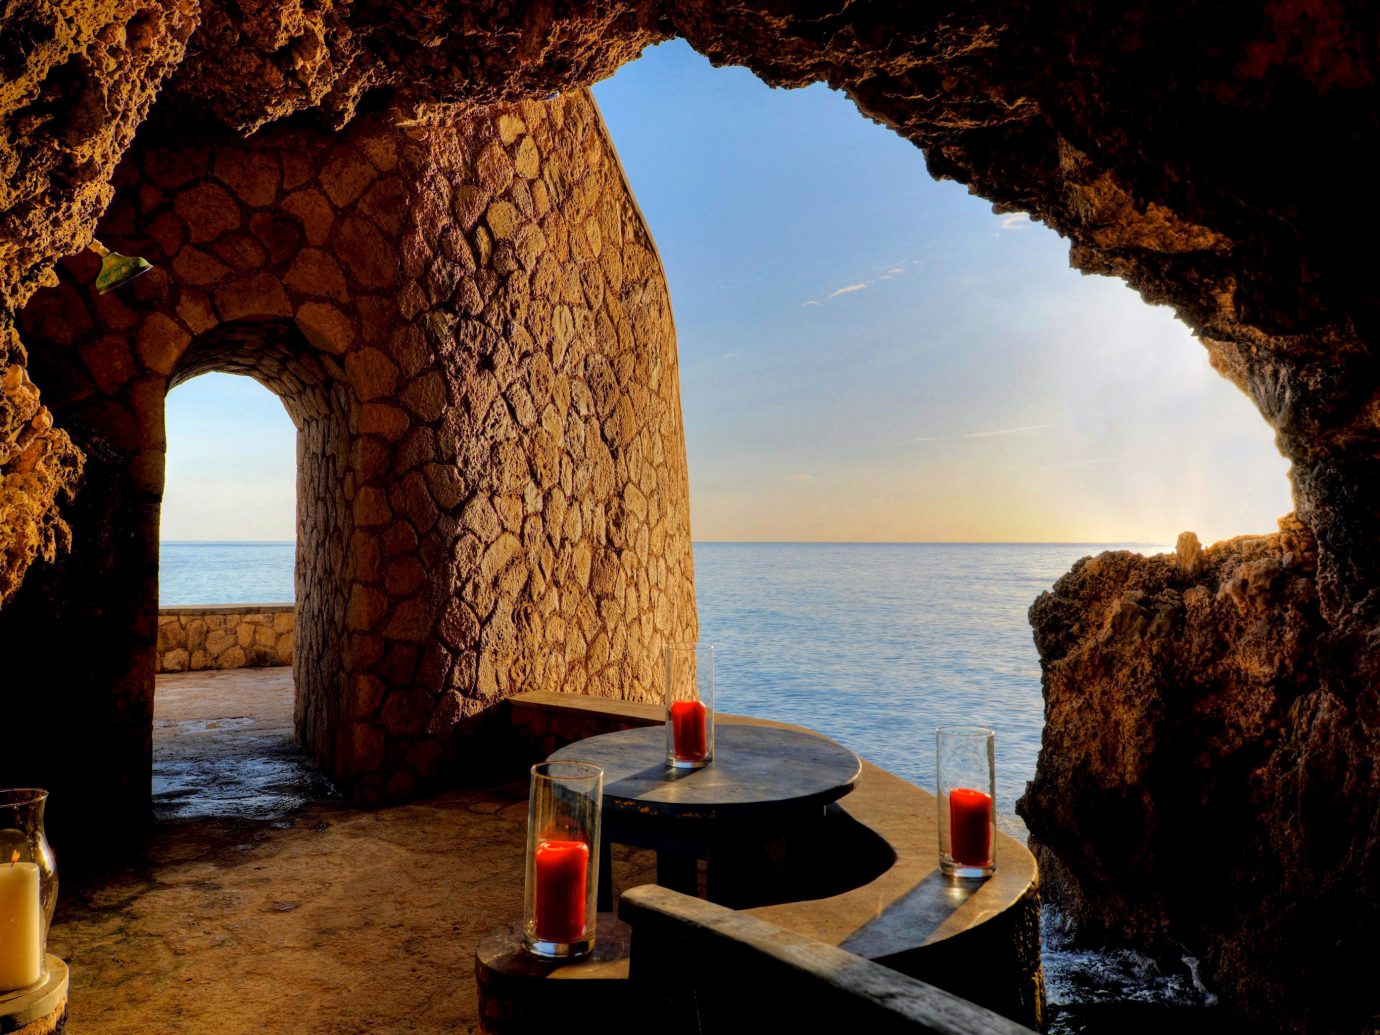 The Caves Hotel - An All Inclusive Luxury Beach Resort In Negril, Jamaica